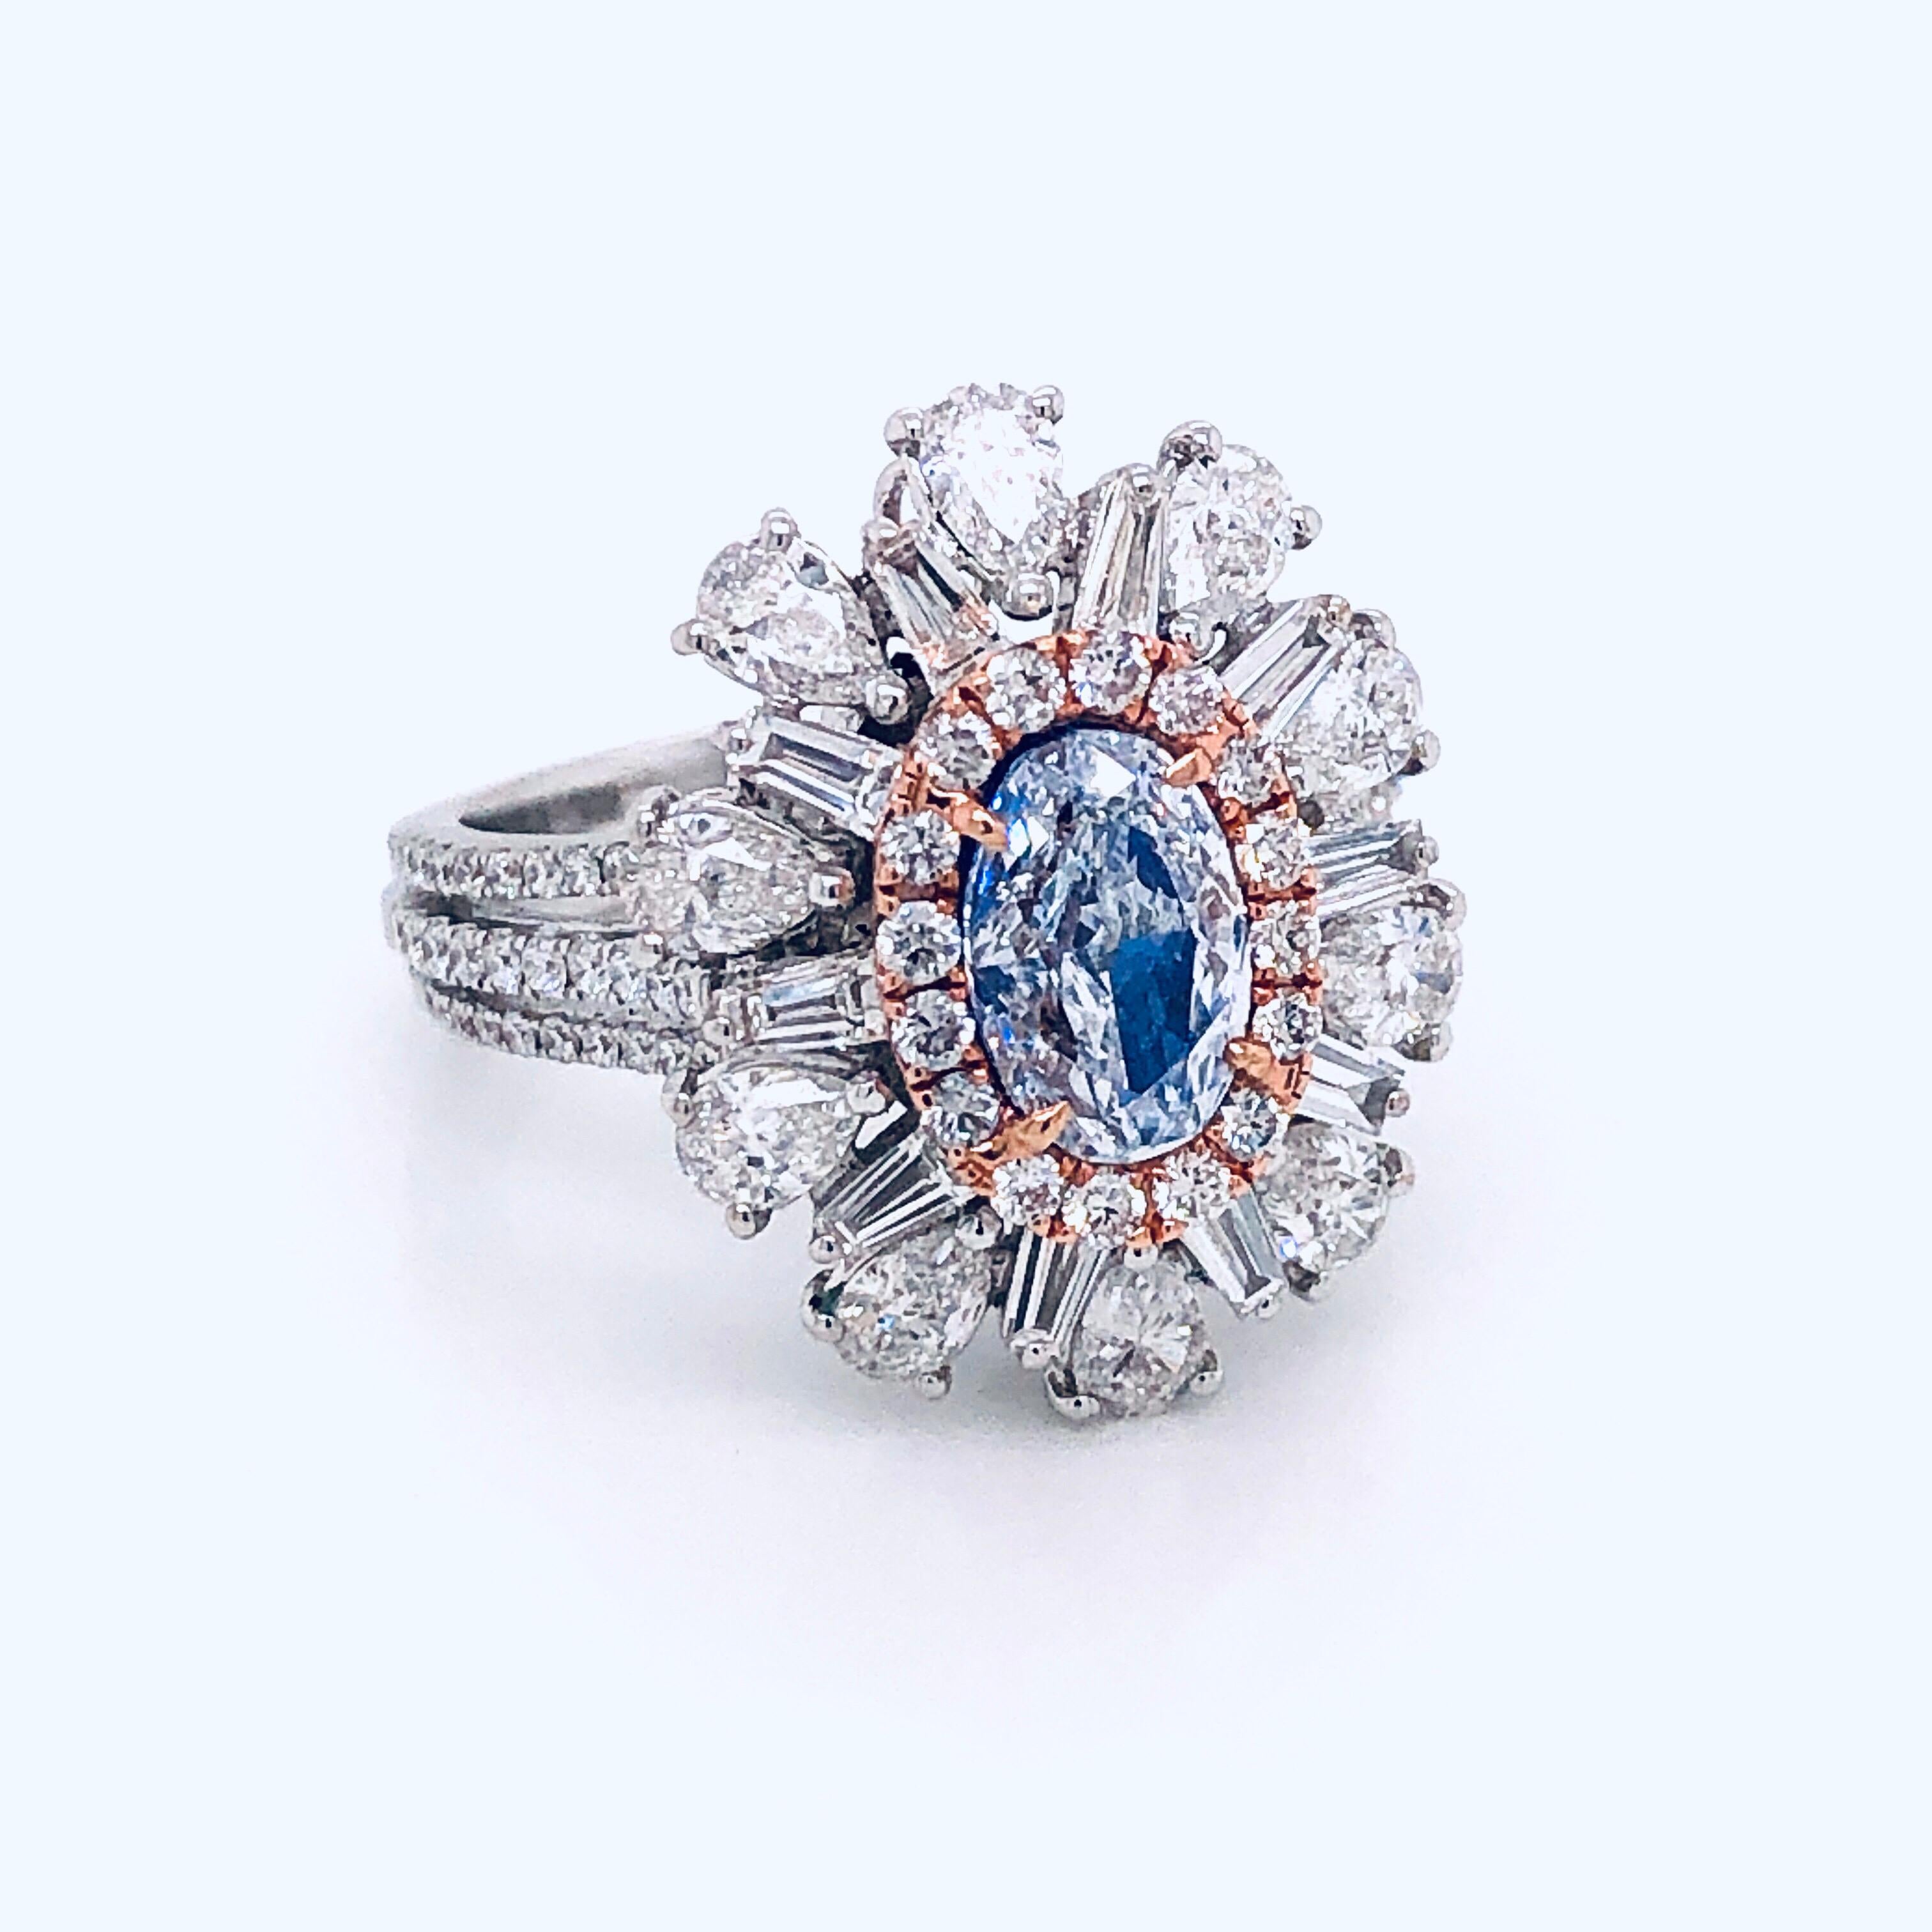 This lovely piece has been designed and manufactured in the Emilio Jewelry Atelier. Our brand is known for our perfection in jewelry making, and cherry picking the very best diamonds for our jewels. We specialize in Natural Fancy Diamonds.
Approx